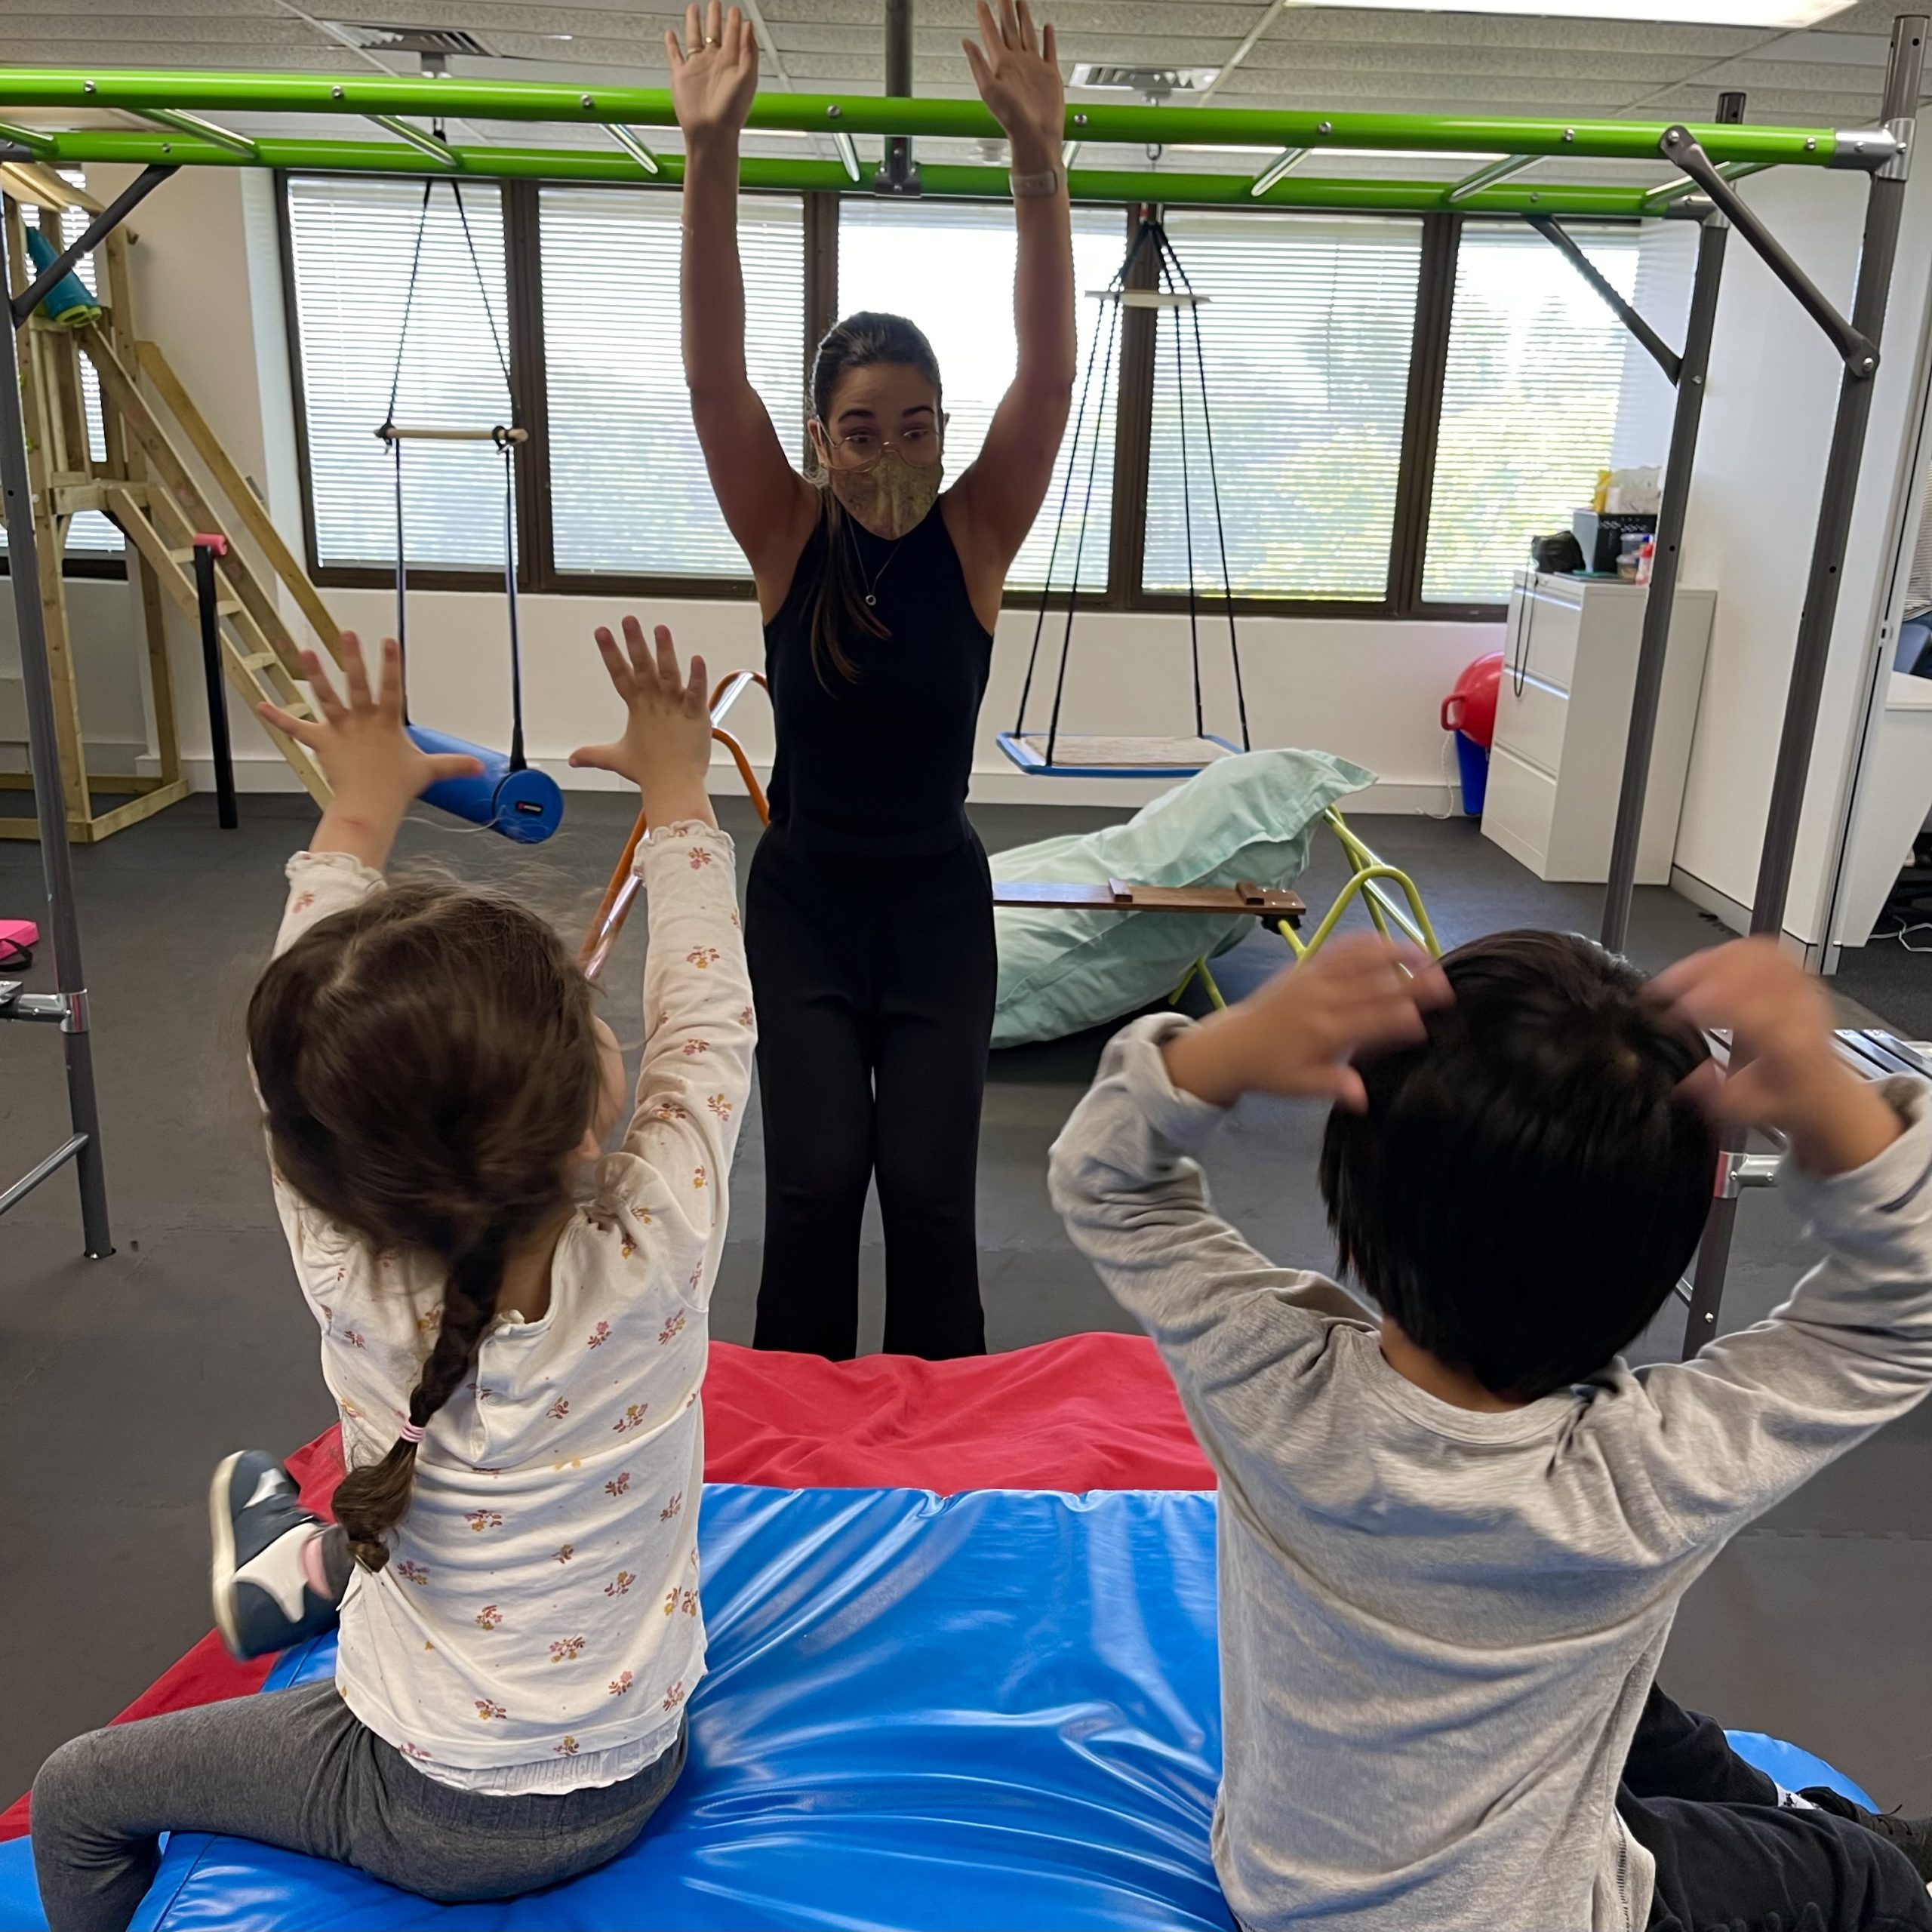 Two young children with autism doing the Early Start Denver Model ESDM in an Occupational Therapy gym at Bondi Junction Sydney